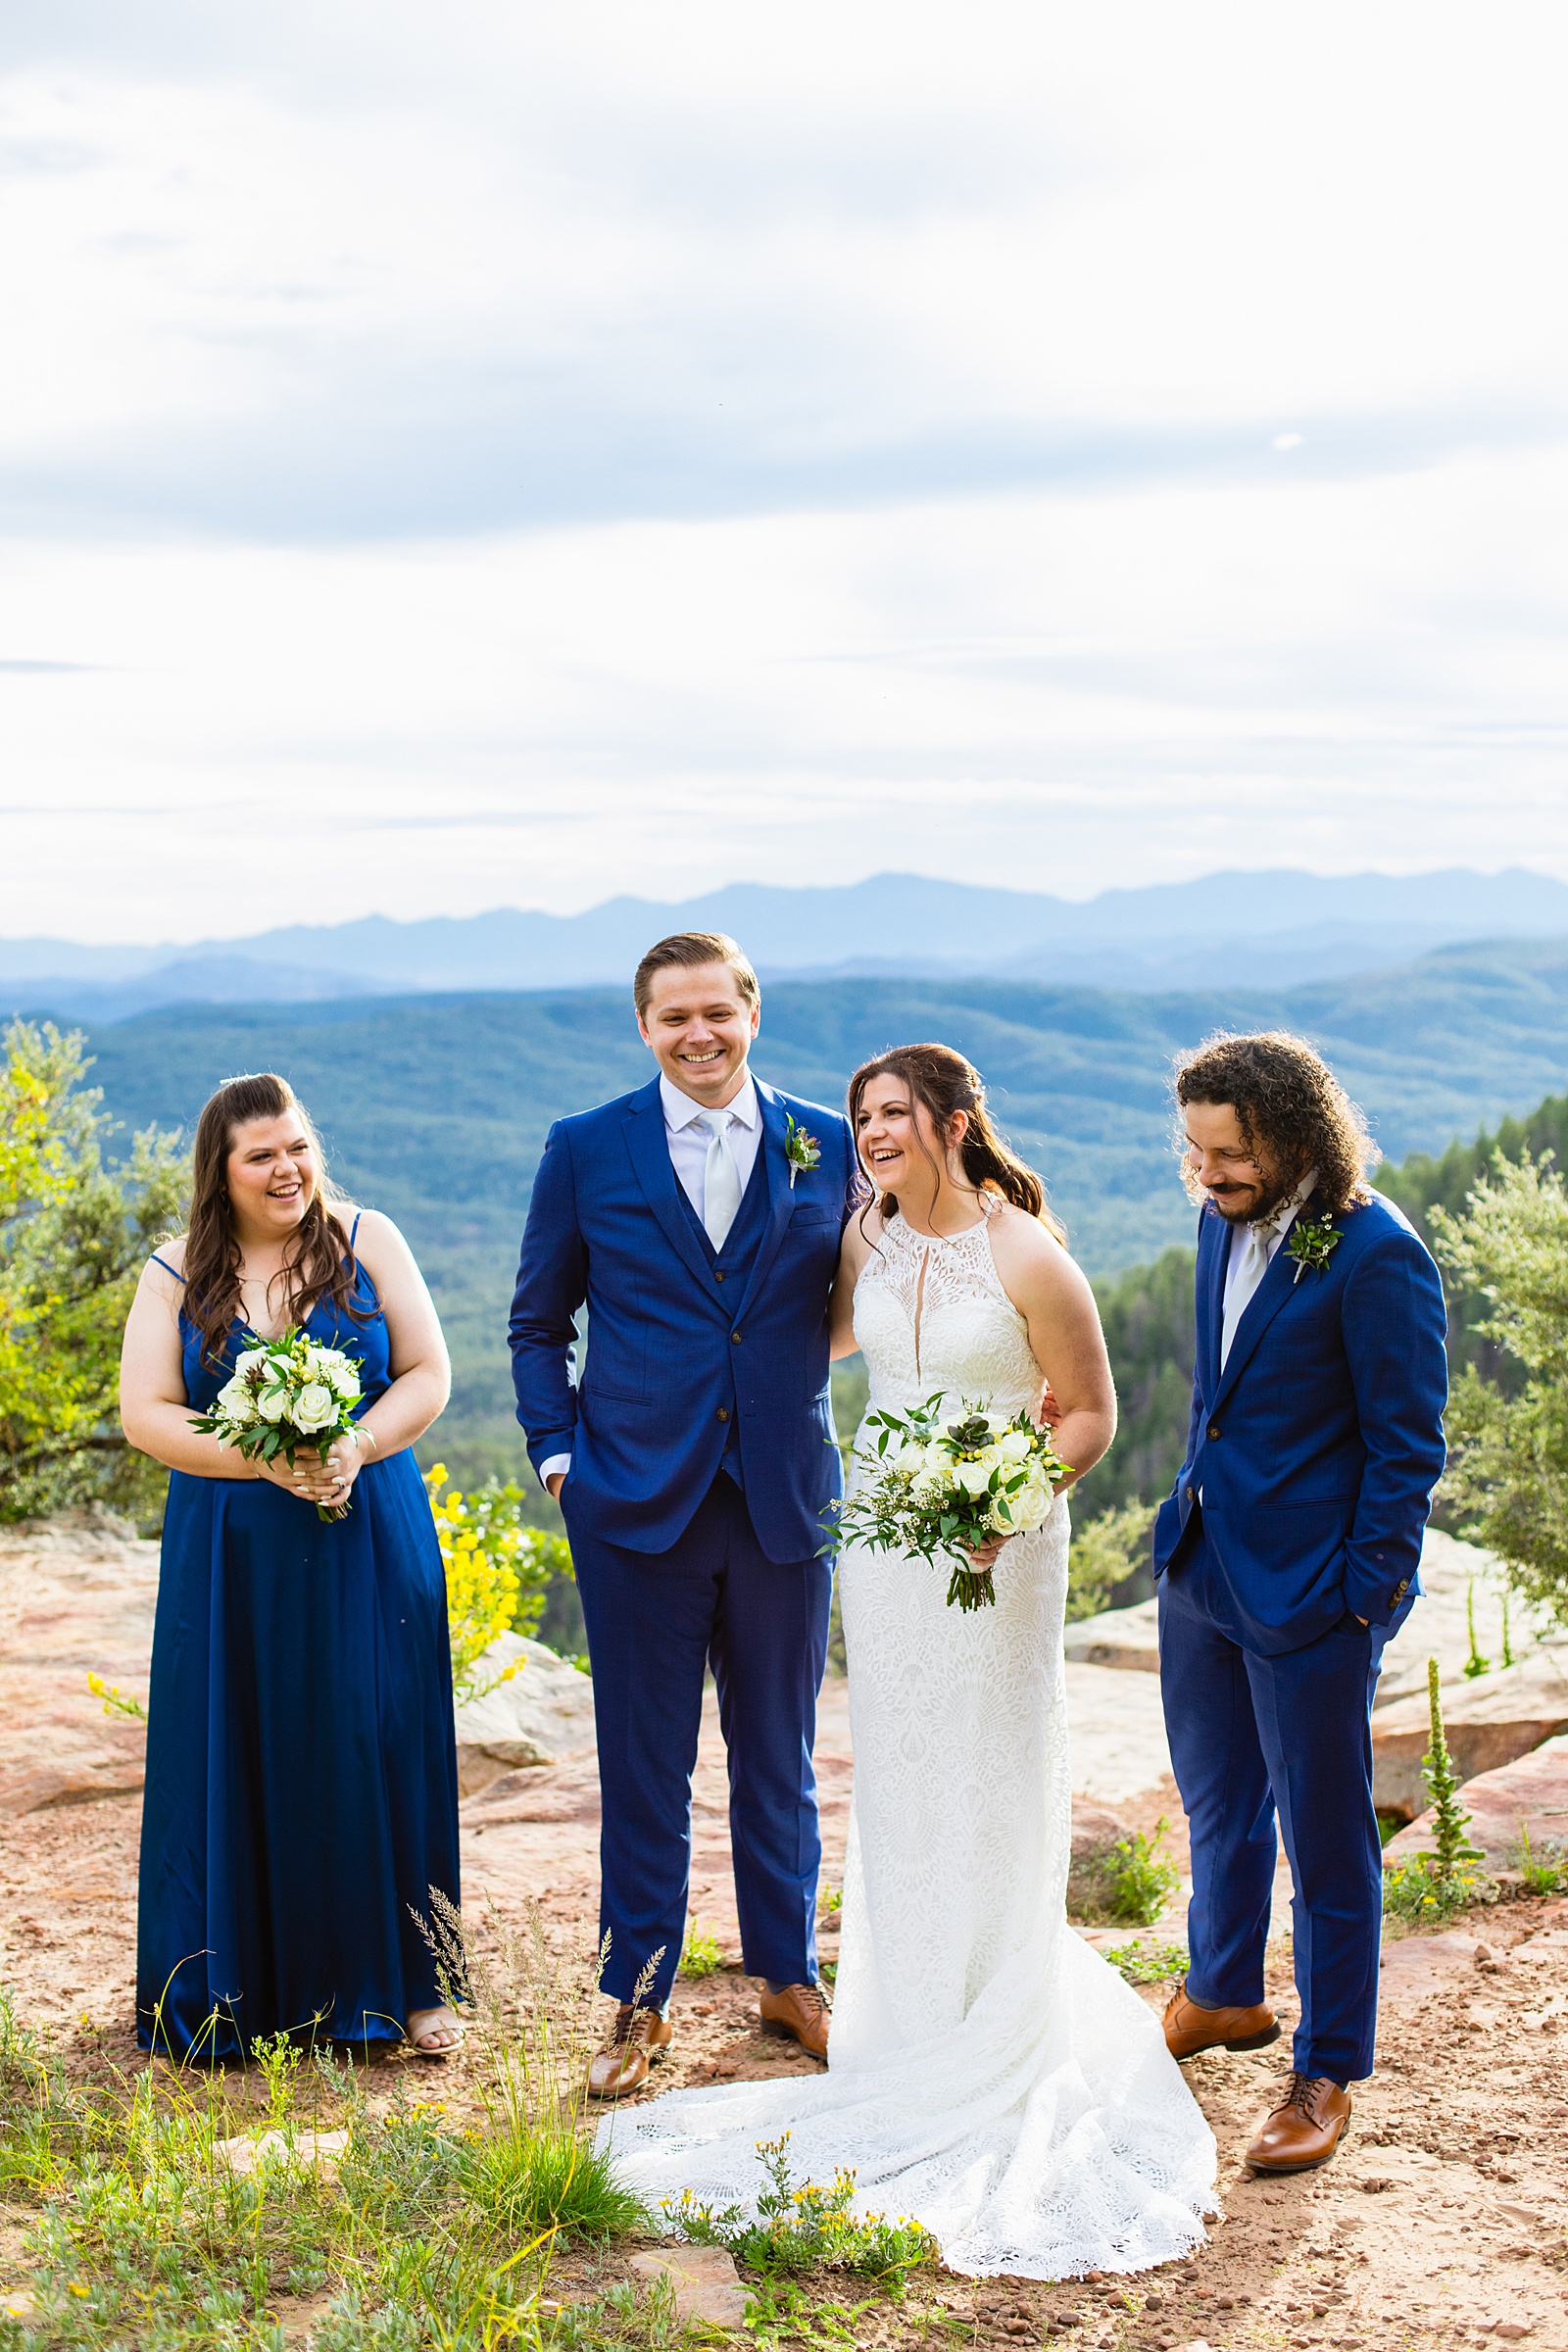 Wedding party laughing together at Mogollon Rim elopement by Payson intimate elopement photographer Juniper and Co Photography.